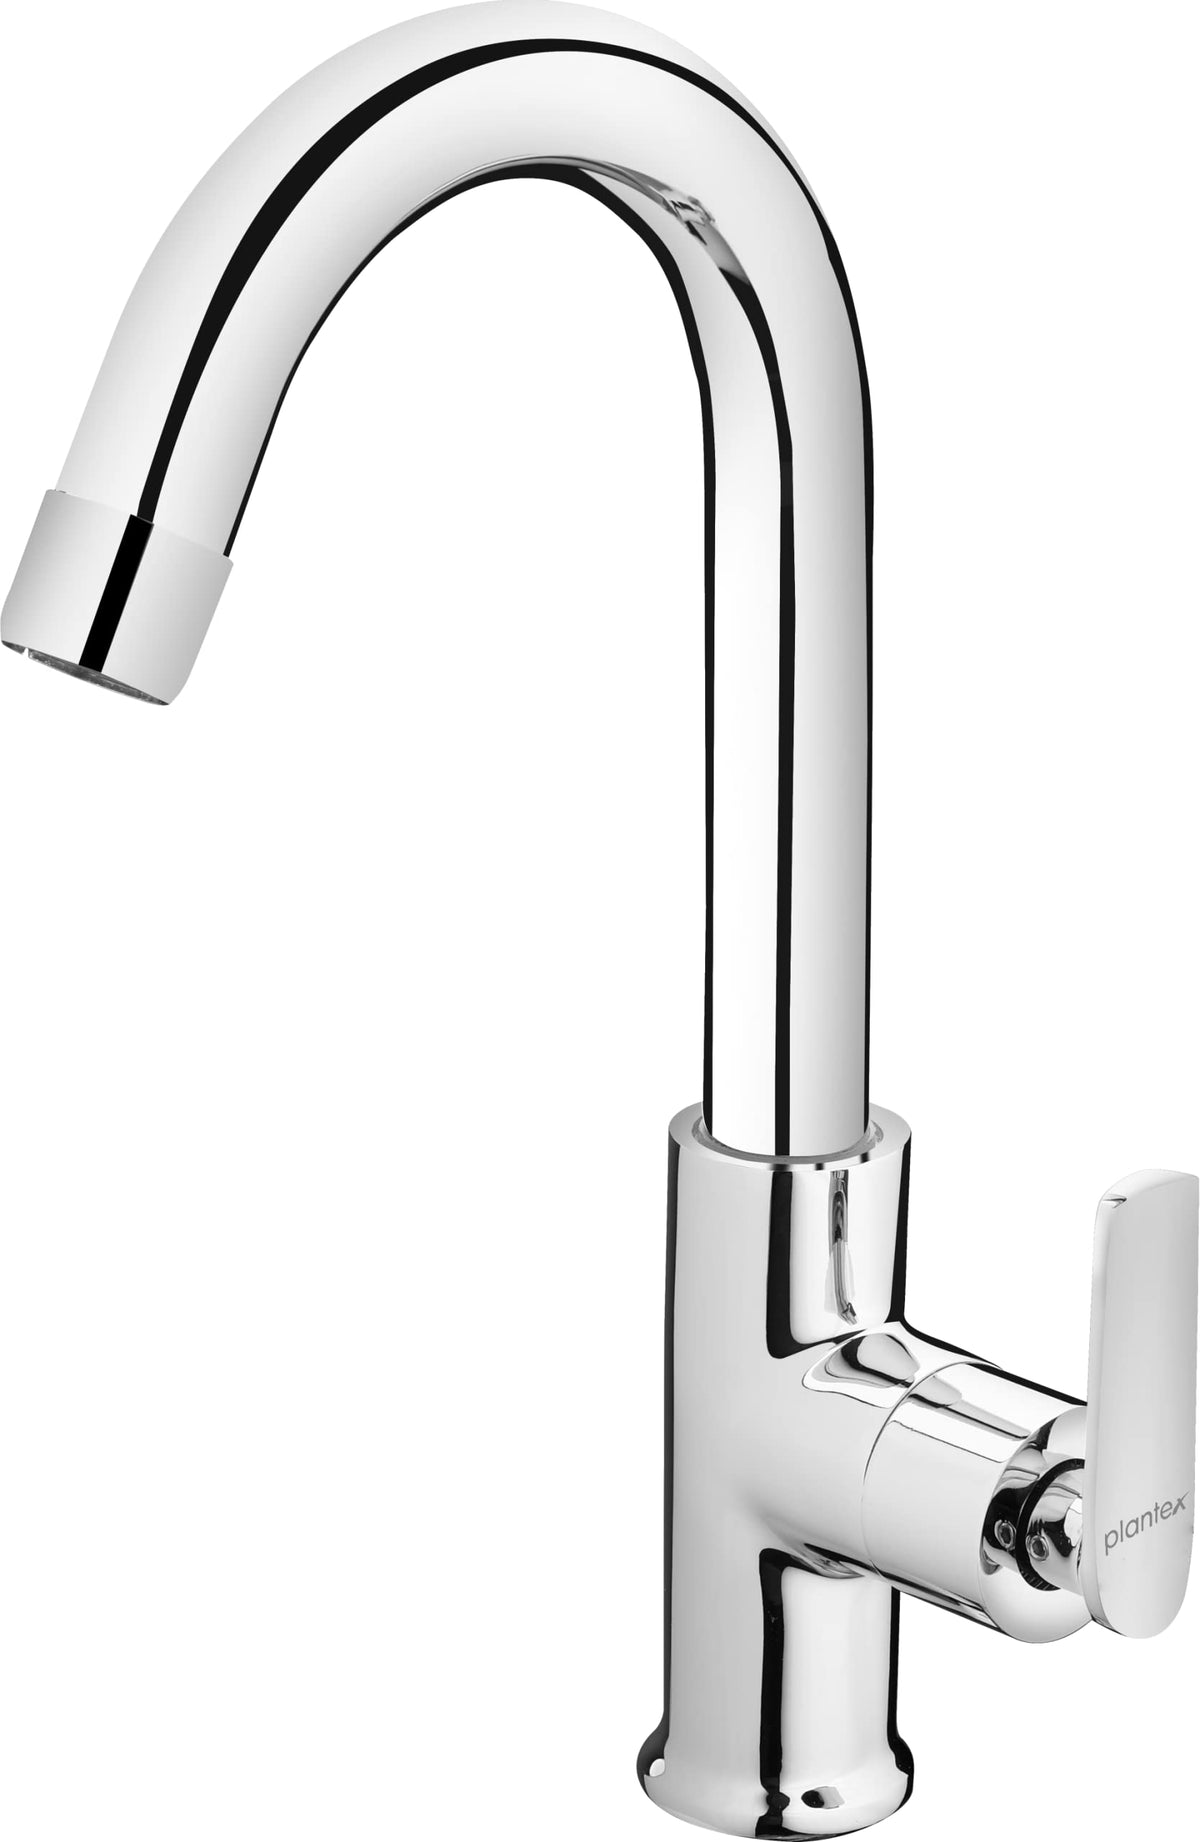 Plantex Pure Brass BAL-512 Single Lever Sink Cock with (High Arch 360 Degree) Swivel Spout for Kitchen Faucet/Sink Tap with Teflon Tape - Table Mounted (Mirror-Chrome Finish)